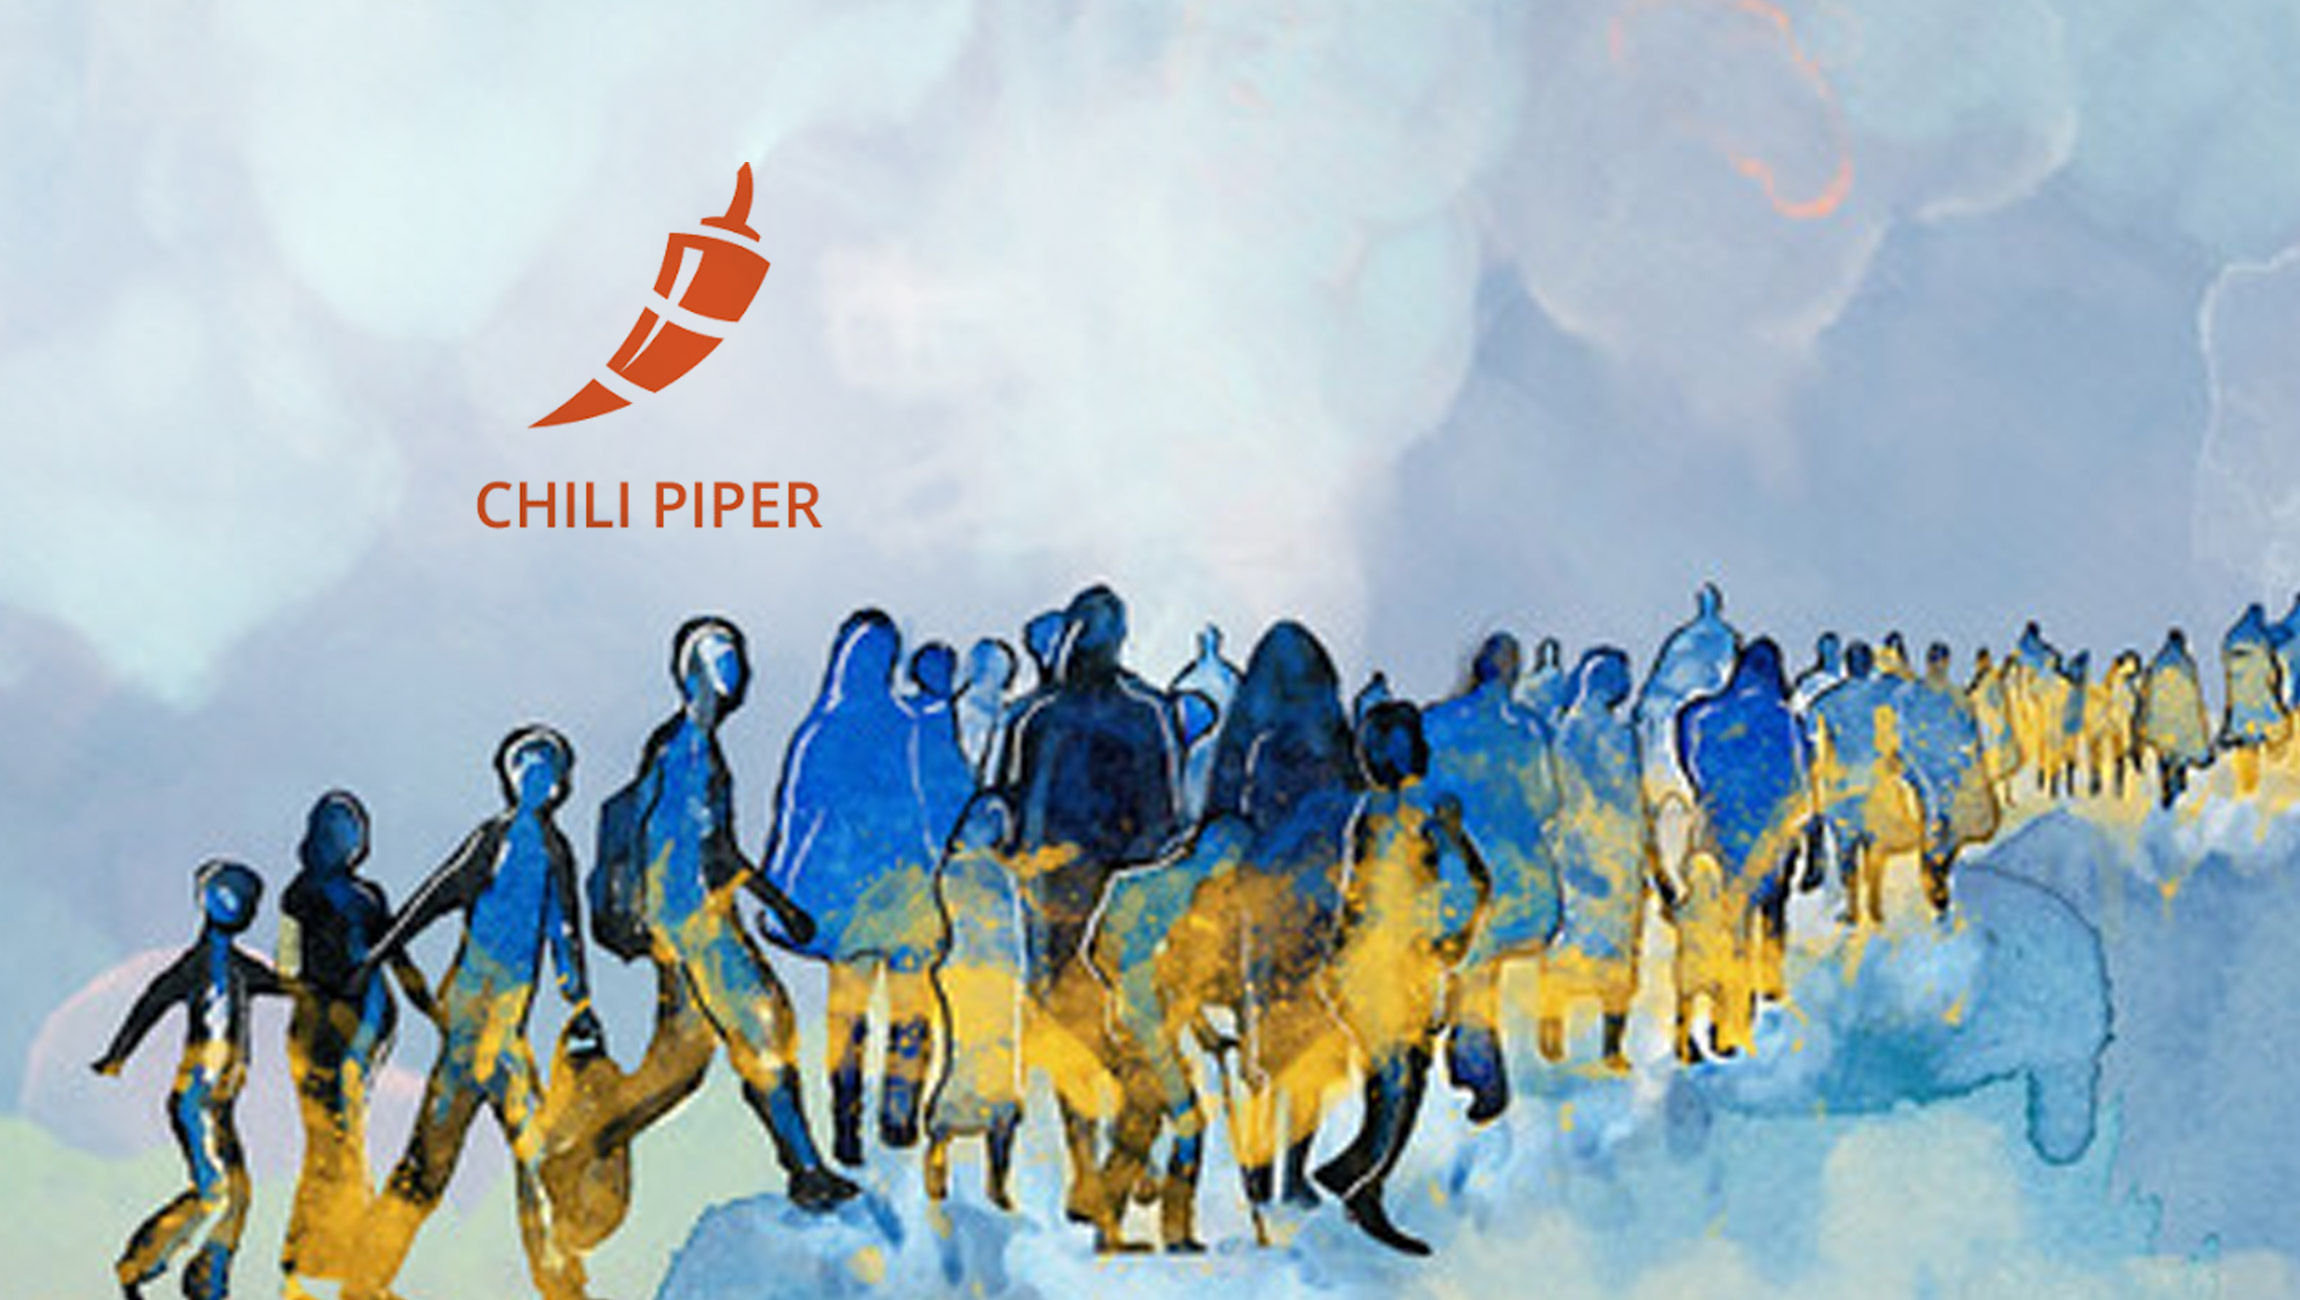 Chili Piper Supports More Than 100,000 Ukrainian Refugees